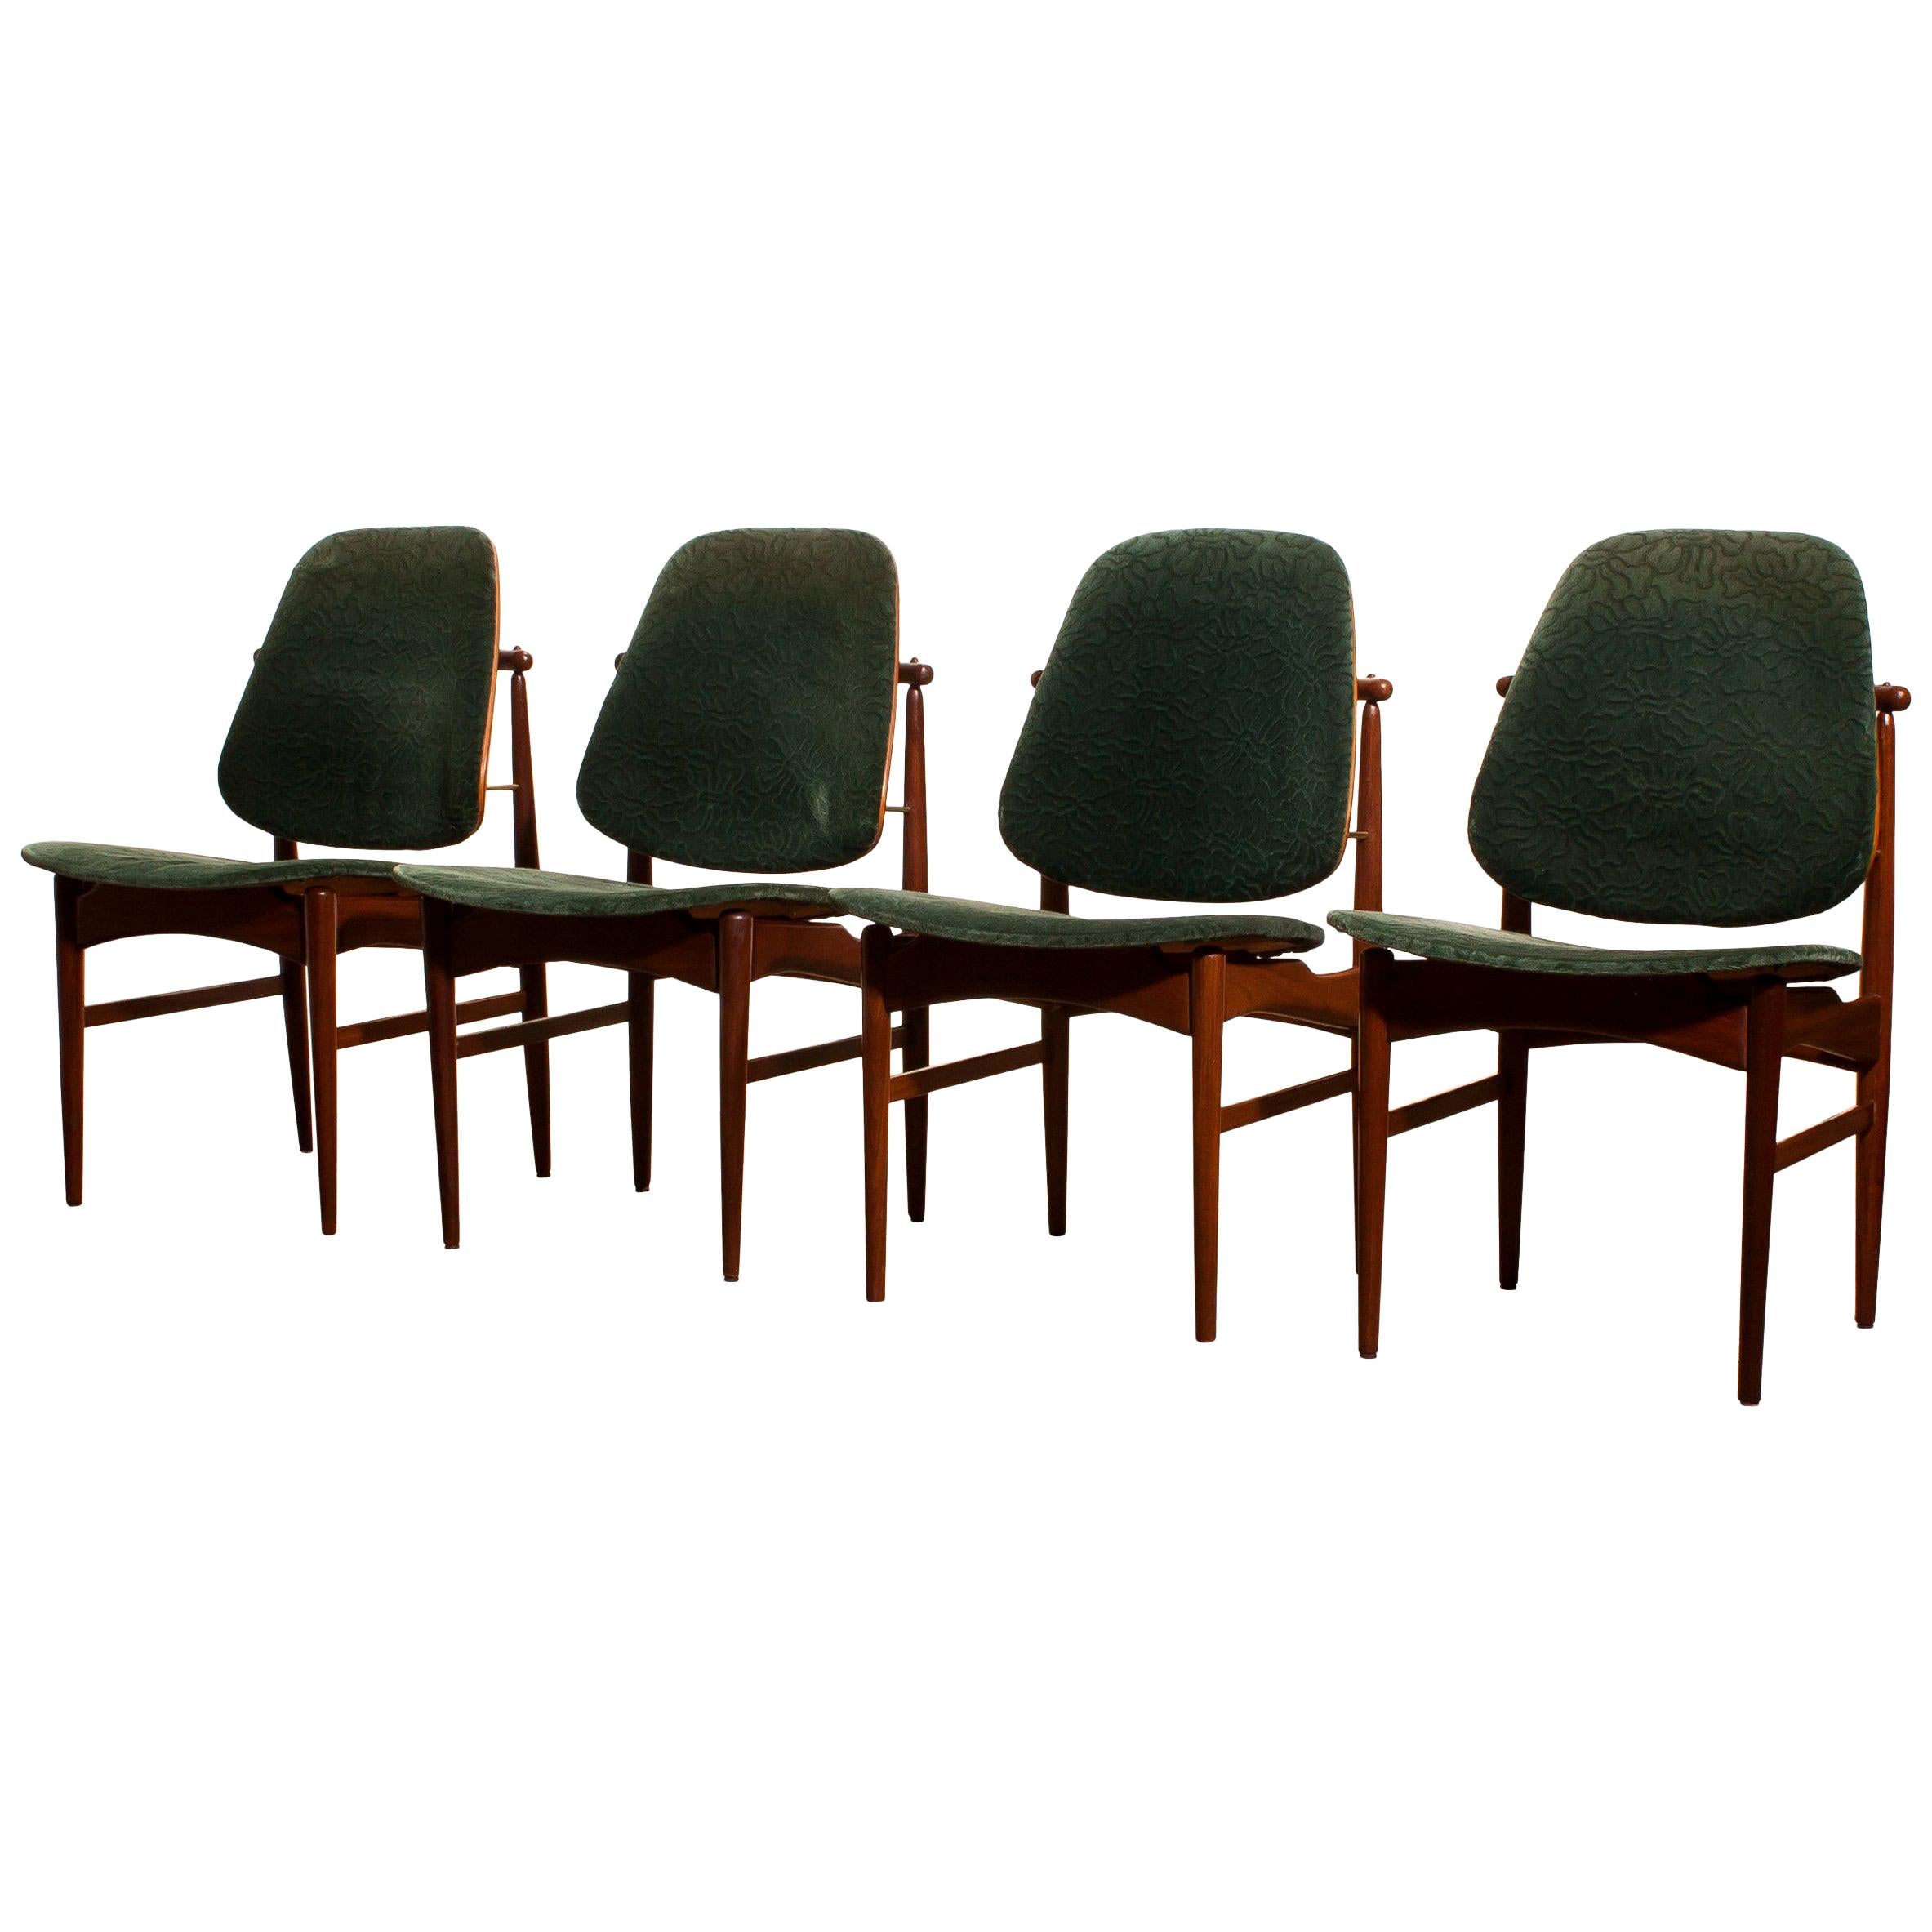 Beautiful set of four Arne Vodder design armchairs made by France & Daverkosen, Denmark.
The (original) fabric needs to be replaced!
These chairs sit extremely comfortable and are beautifully finished with beautiful bronze details.
The teak